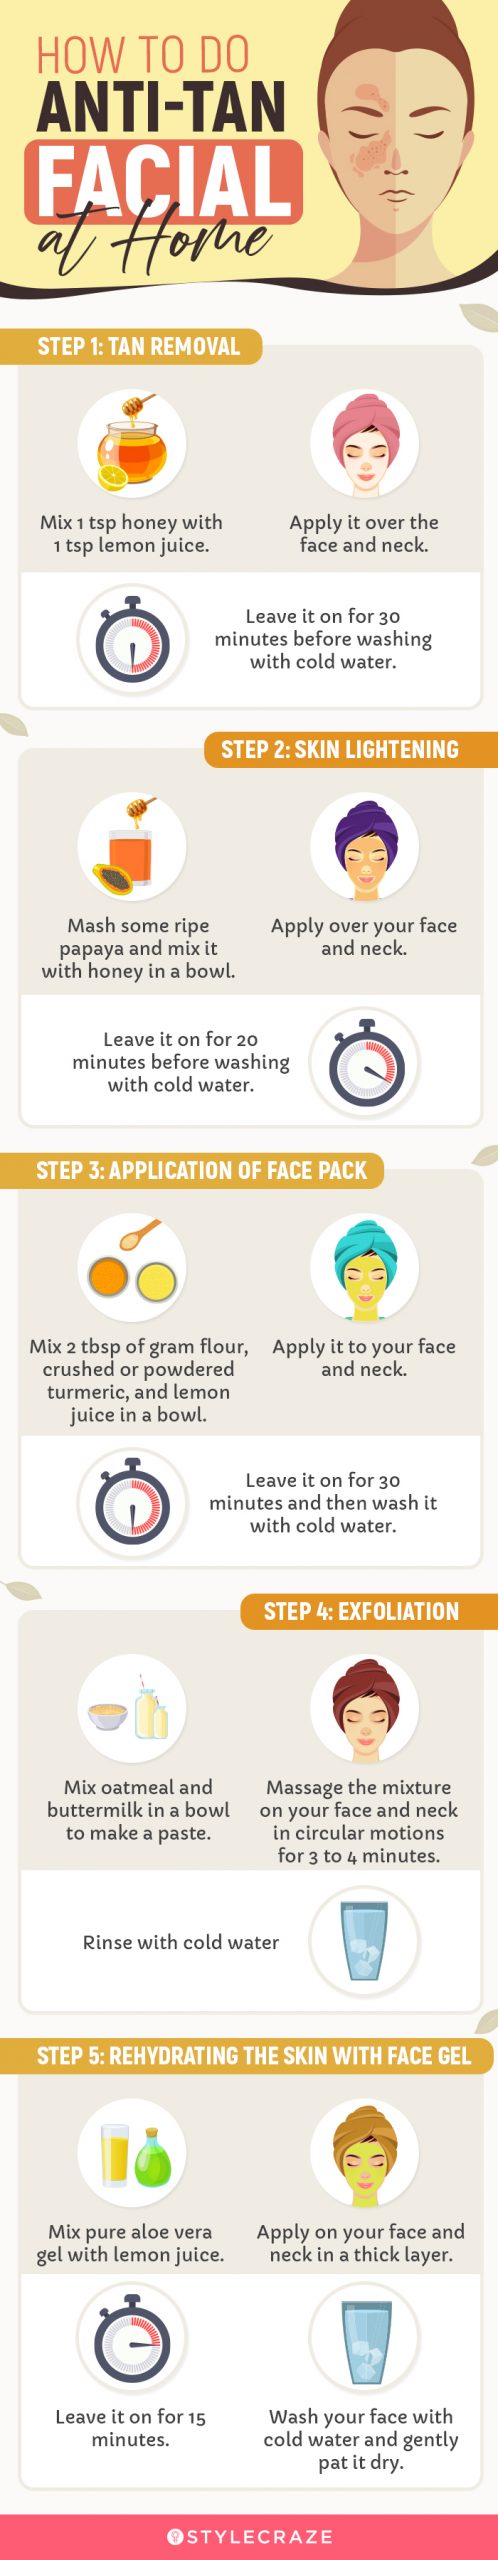 how to do anti-tan facial at home (infographic)